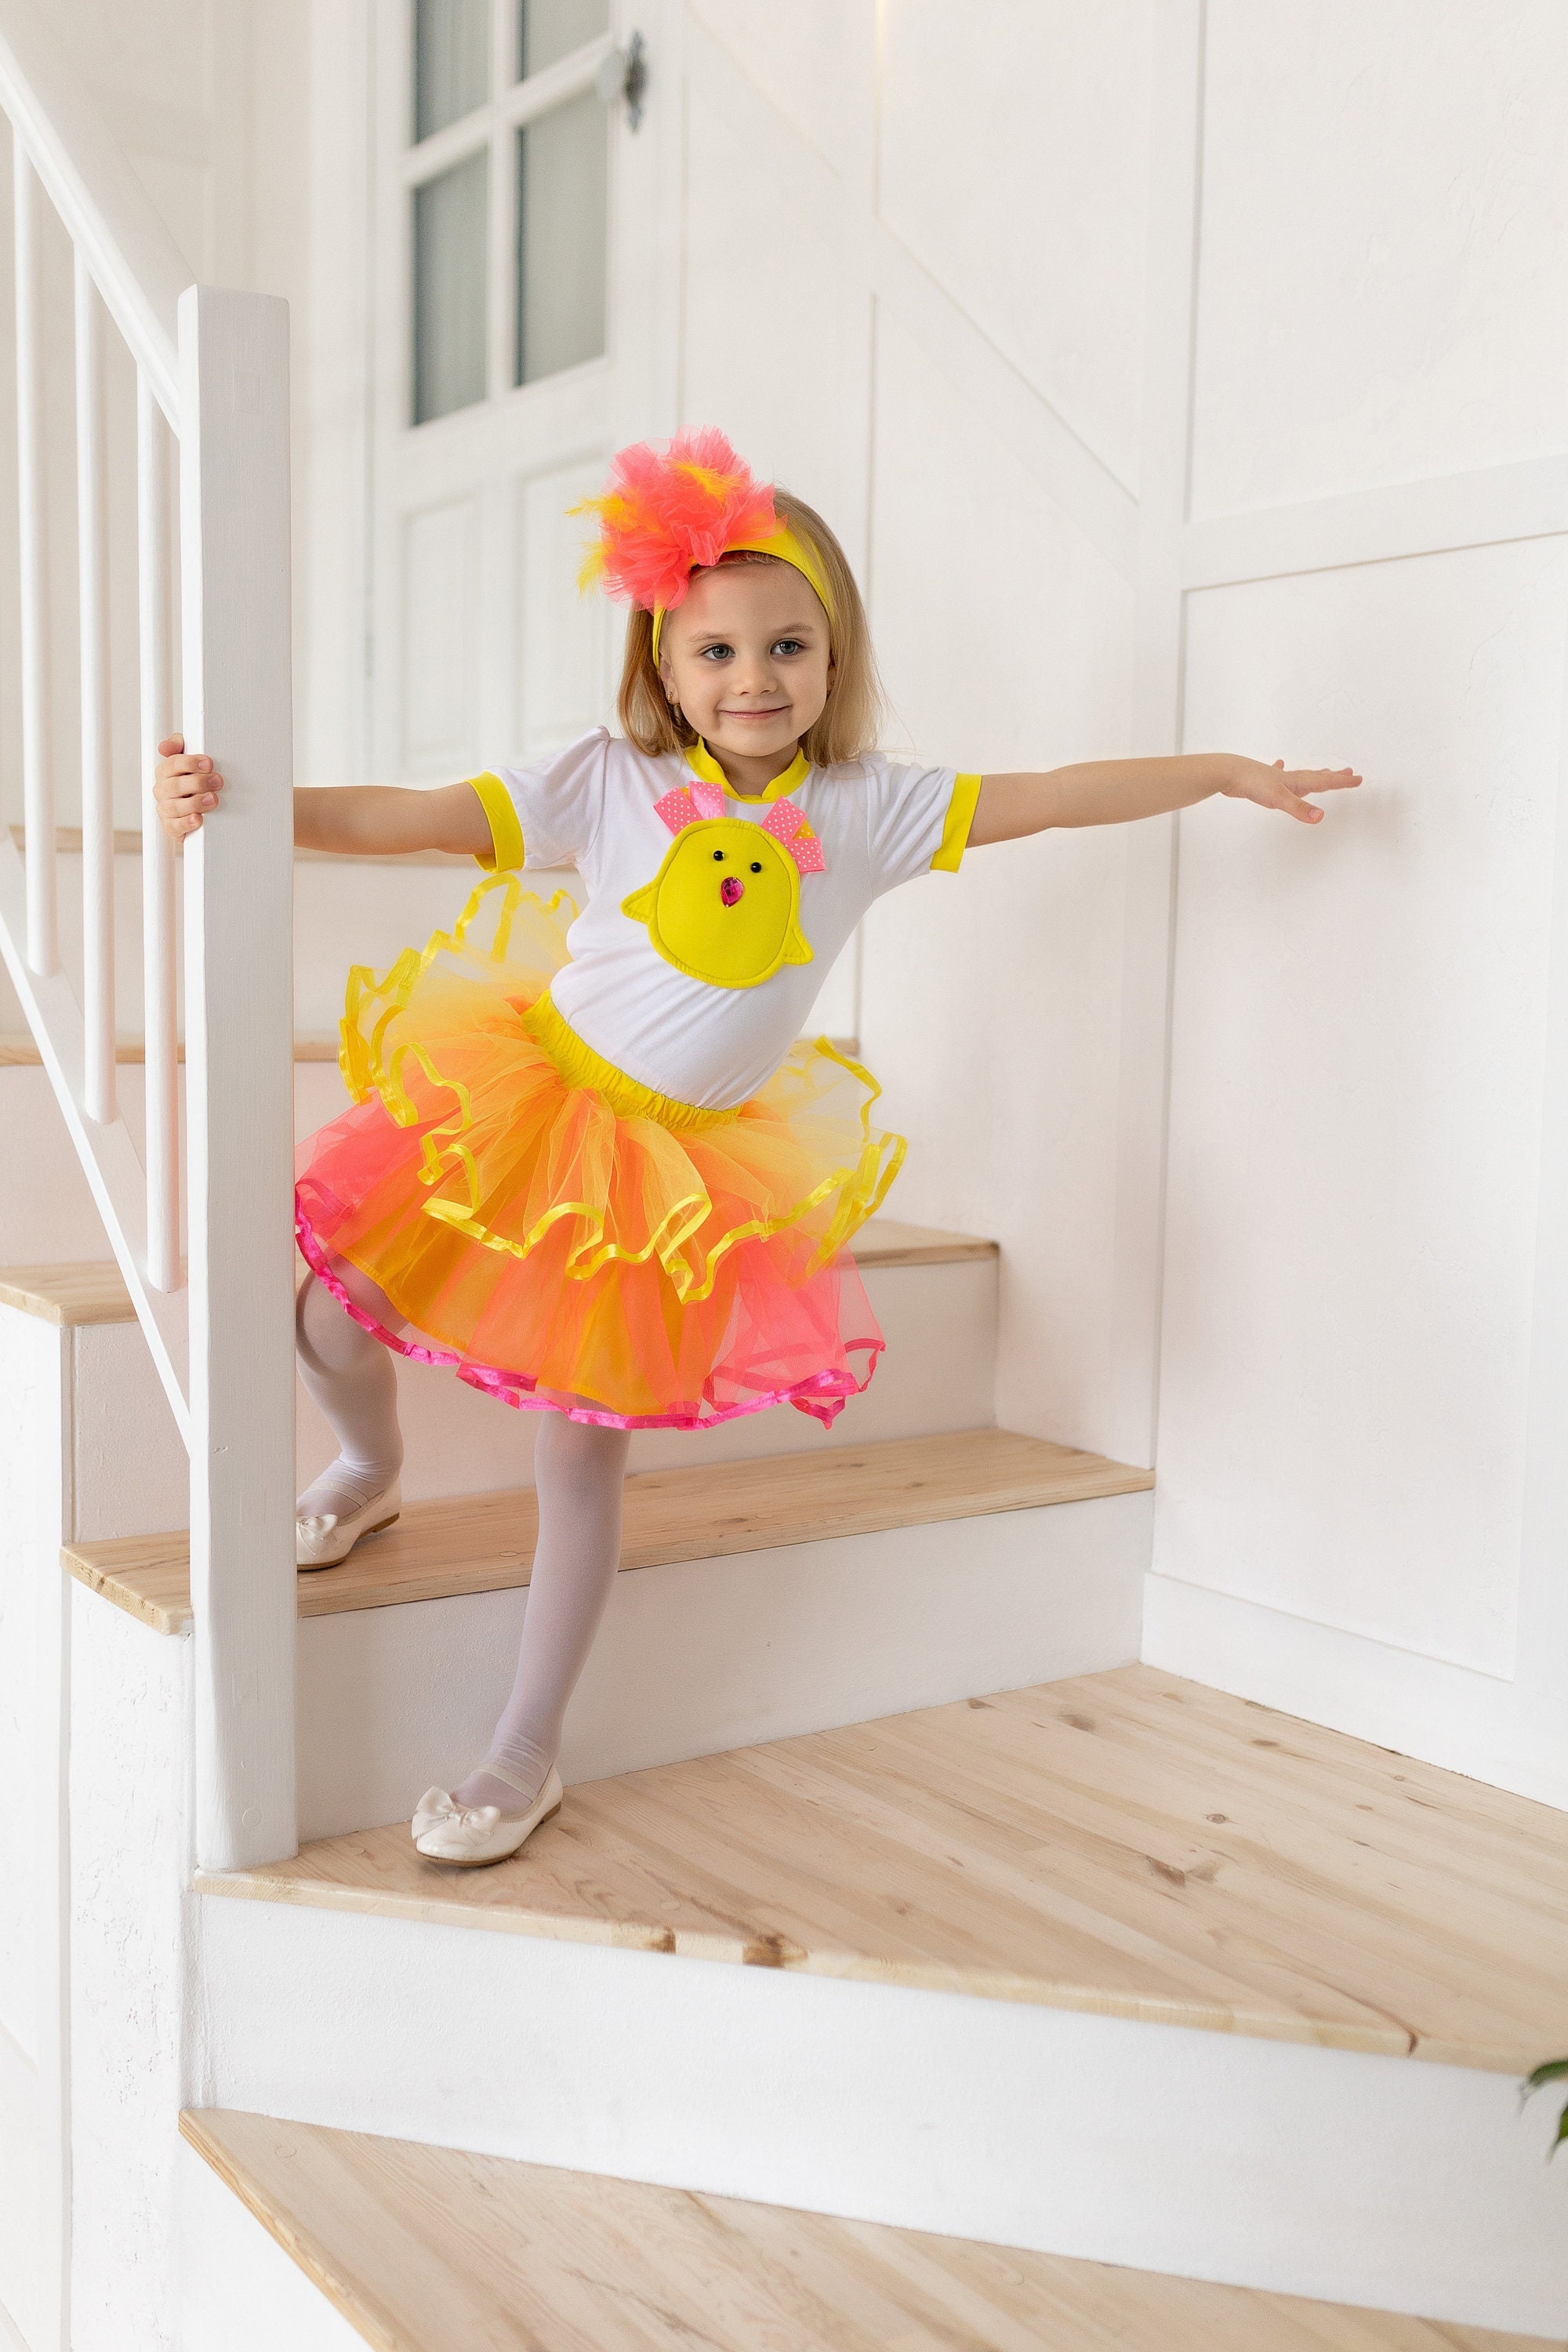 Classic Easter Dresses for Little Girls - arinsolangeathome